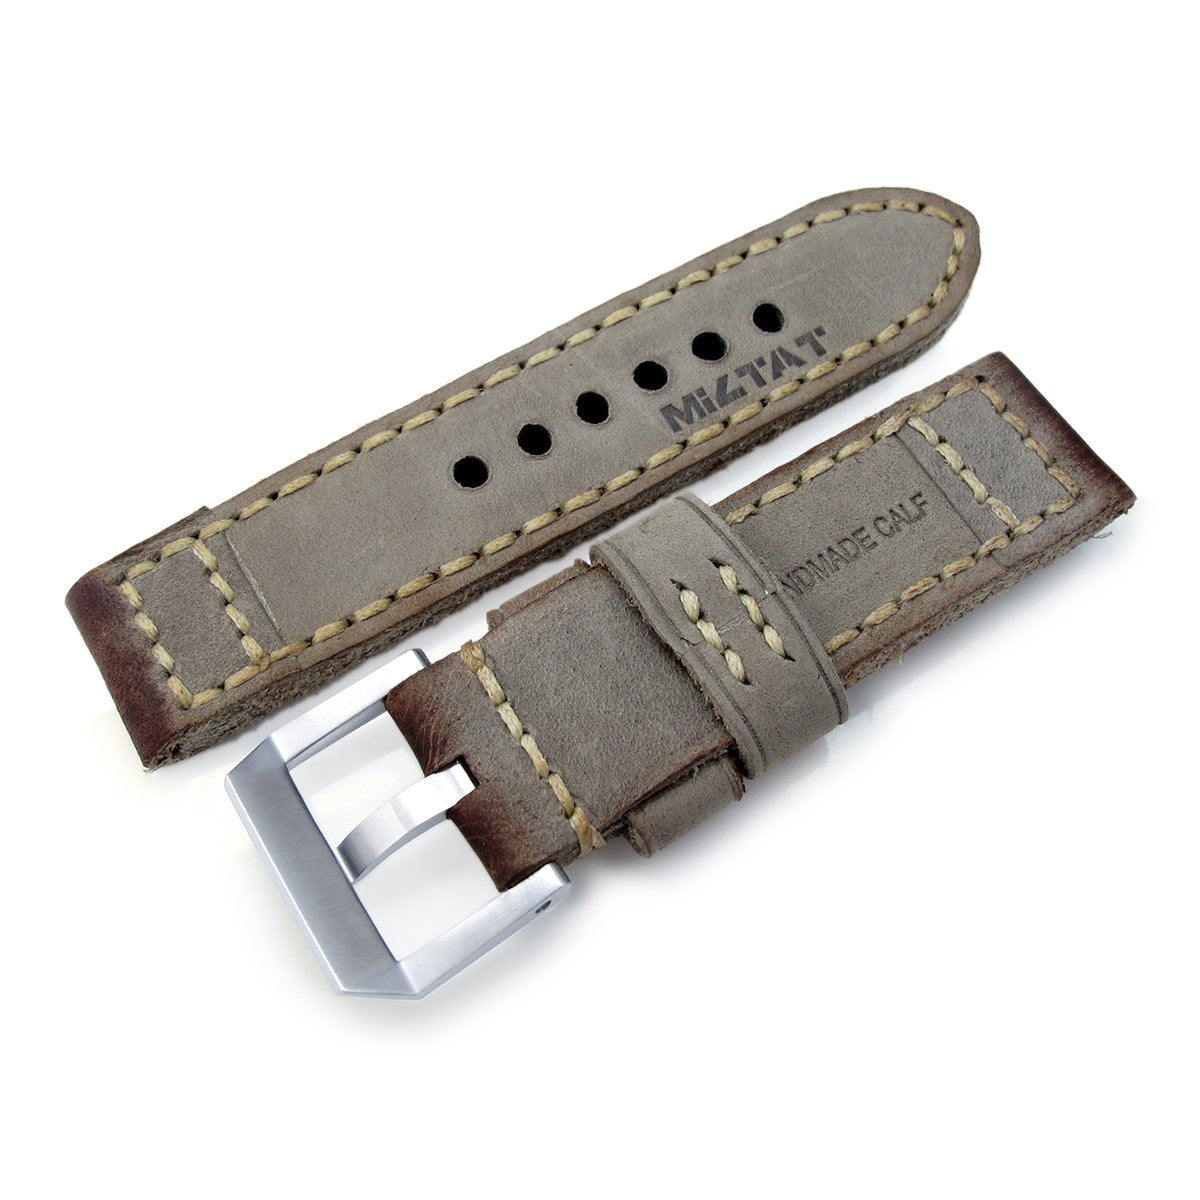 24mm MiLTAT Handmade Vintage Calf Leather Watch Band Hand Painted Grey Hand Stitches Strapcode Watch Bands